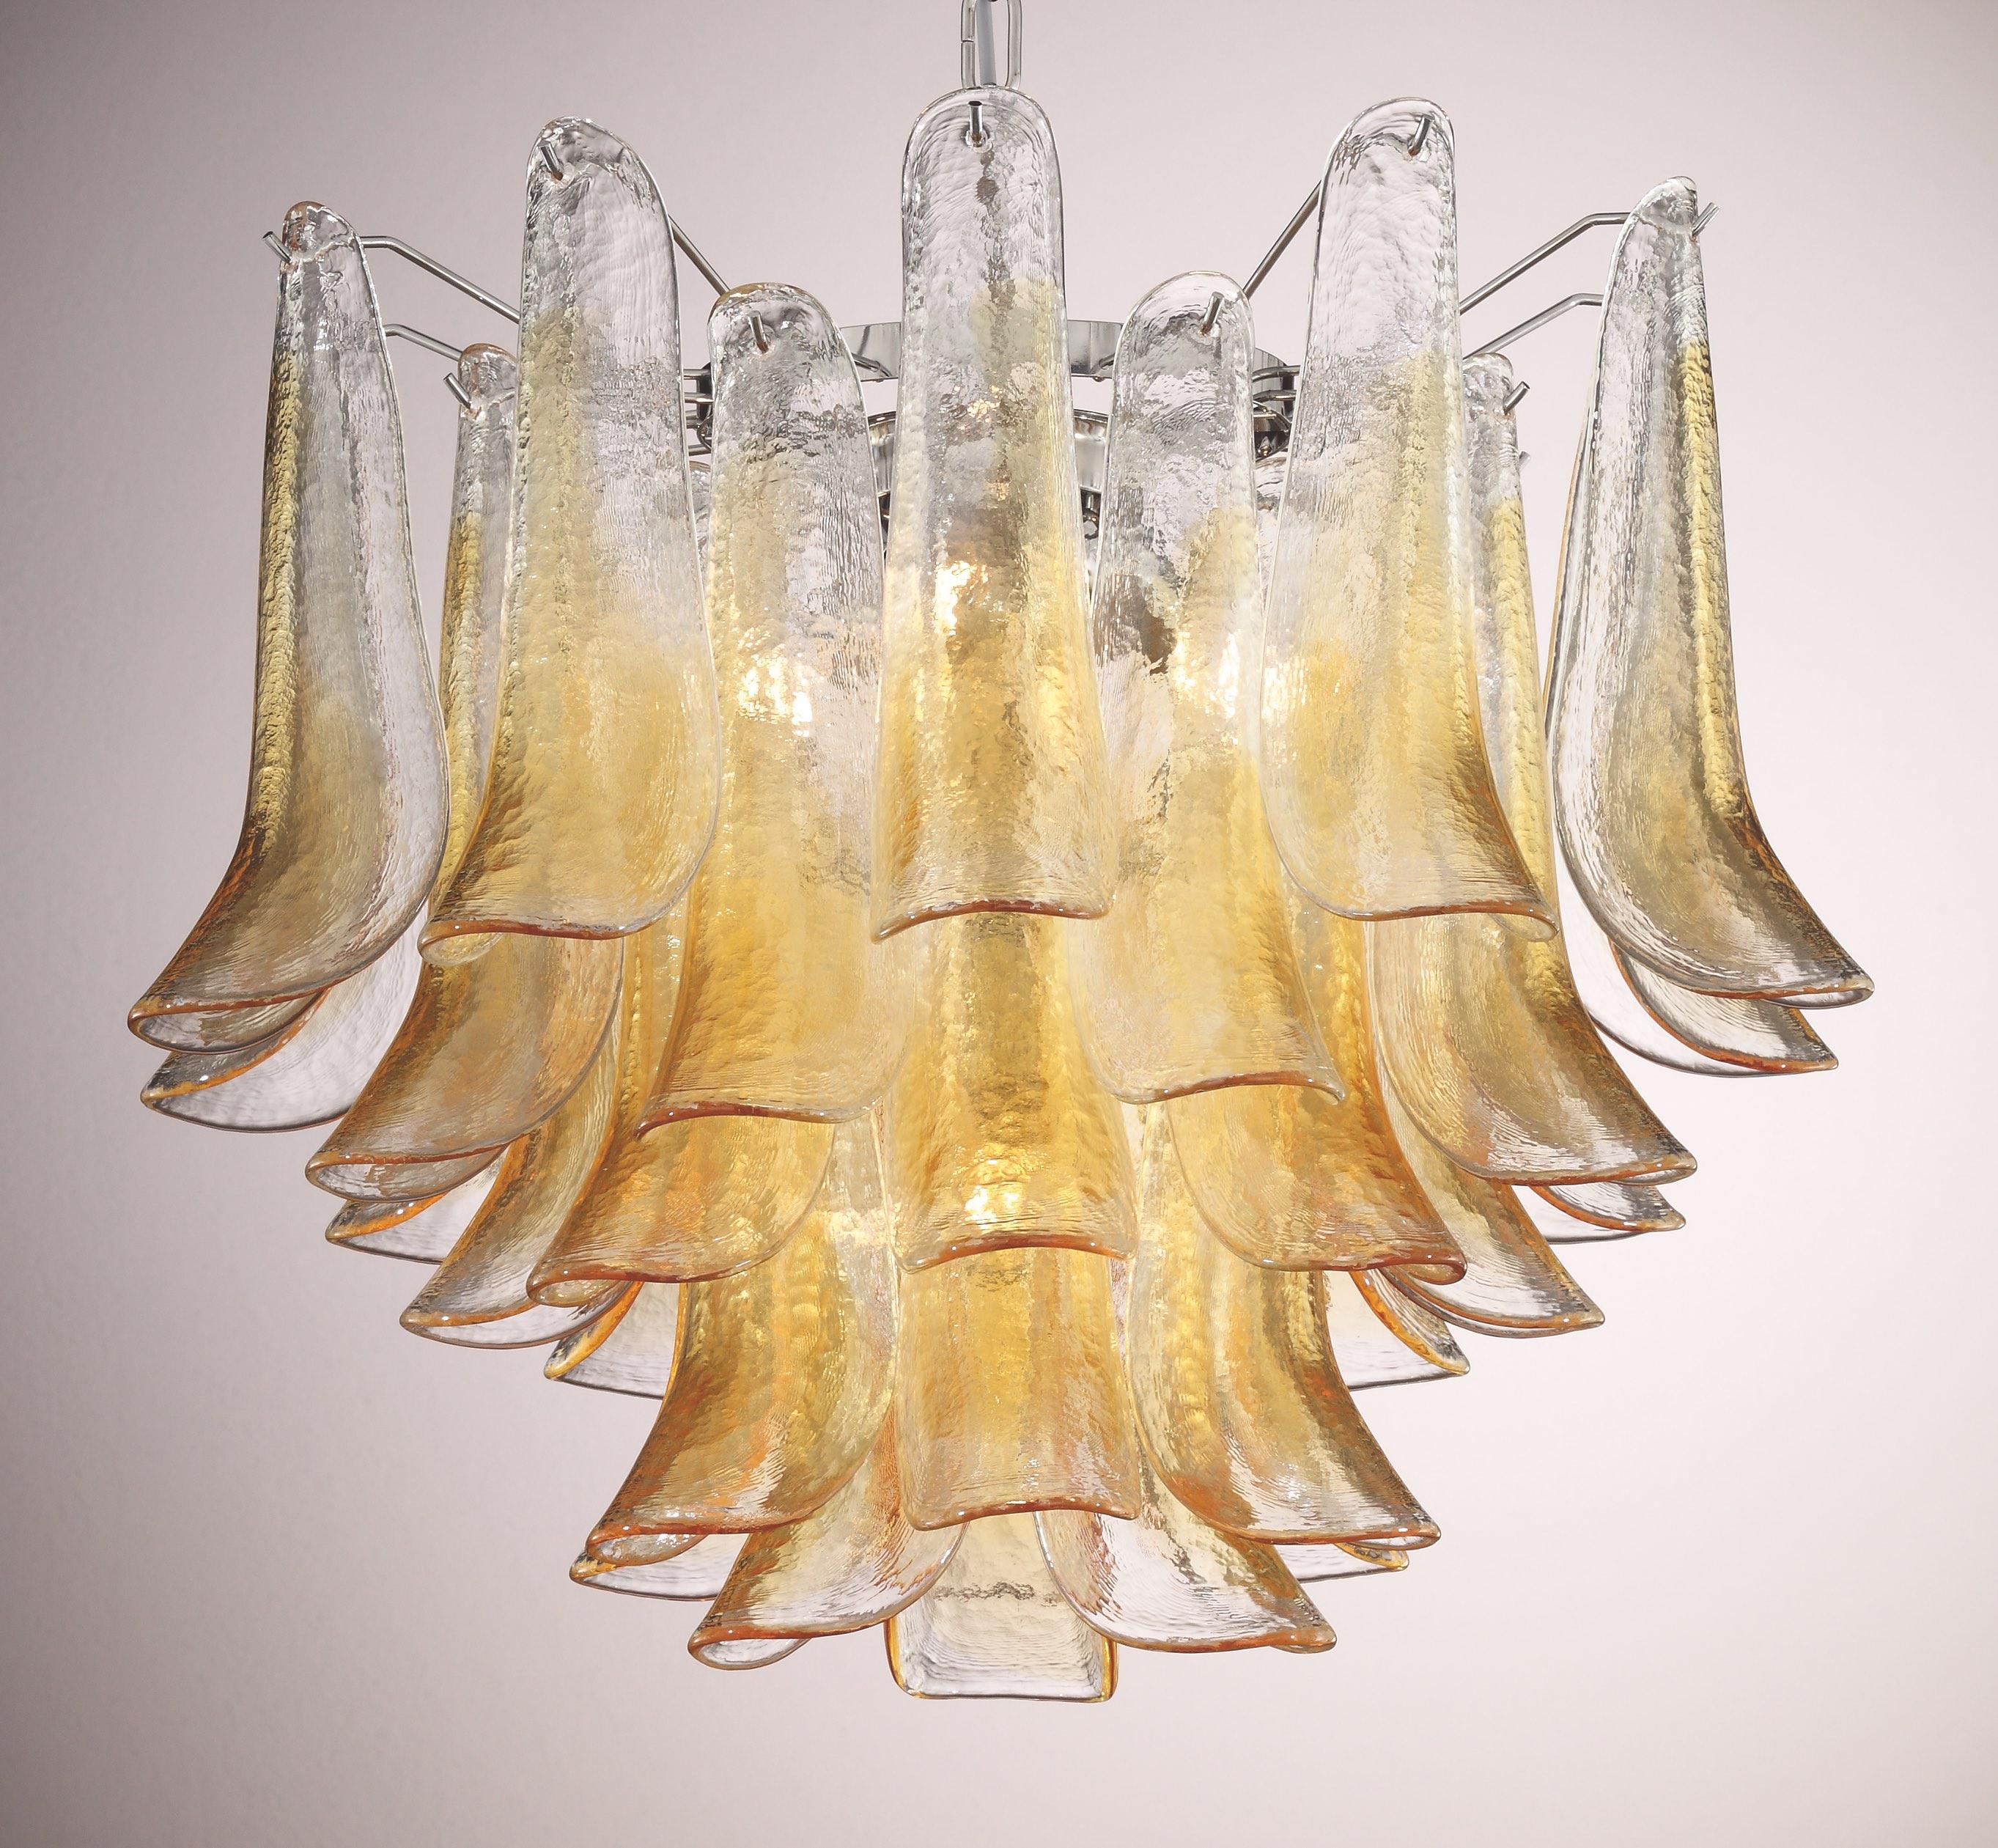 Italian chandelier shown with clear and amber Murano glass petals mounted on chrome finish metal frame / Designed by Fabio Bergomi for Fabio Ltd, inspired by Mazzega / Made in Italy
5 lights / E26 or E27 type / max 60W each
Measures: Diameter 23.5